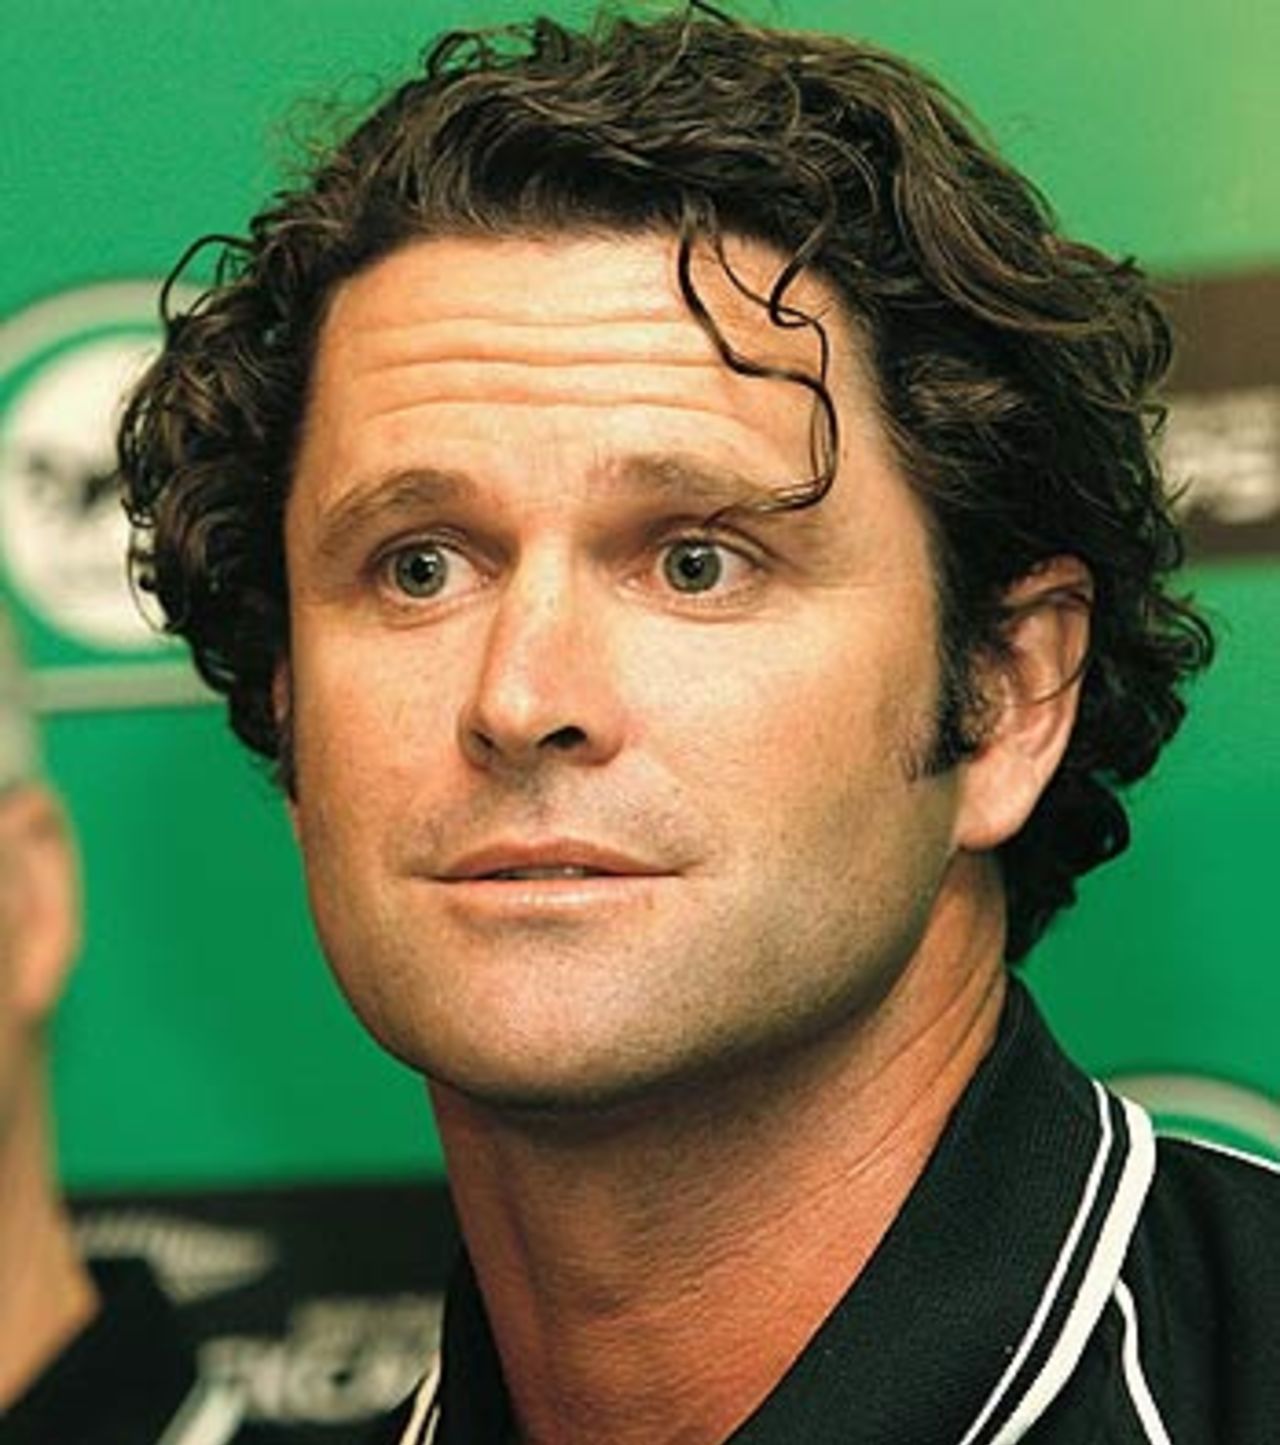 Chris Cairns announced his retirement at a news conference in Christchurch, January 23, 2006